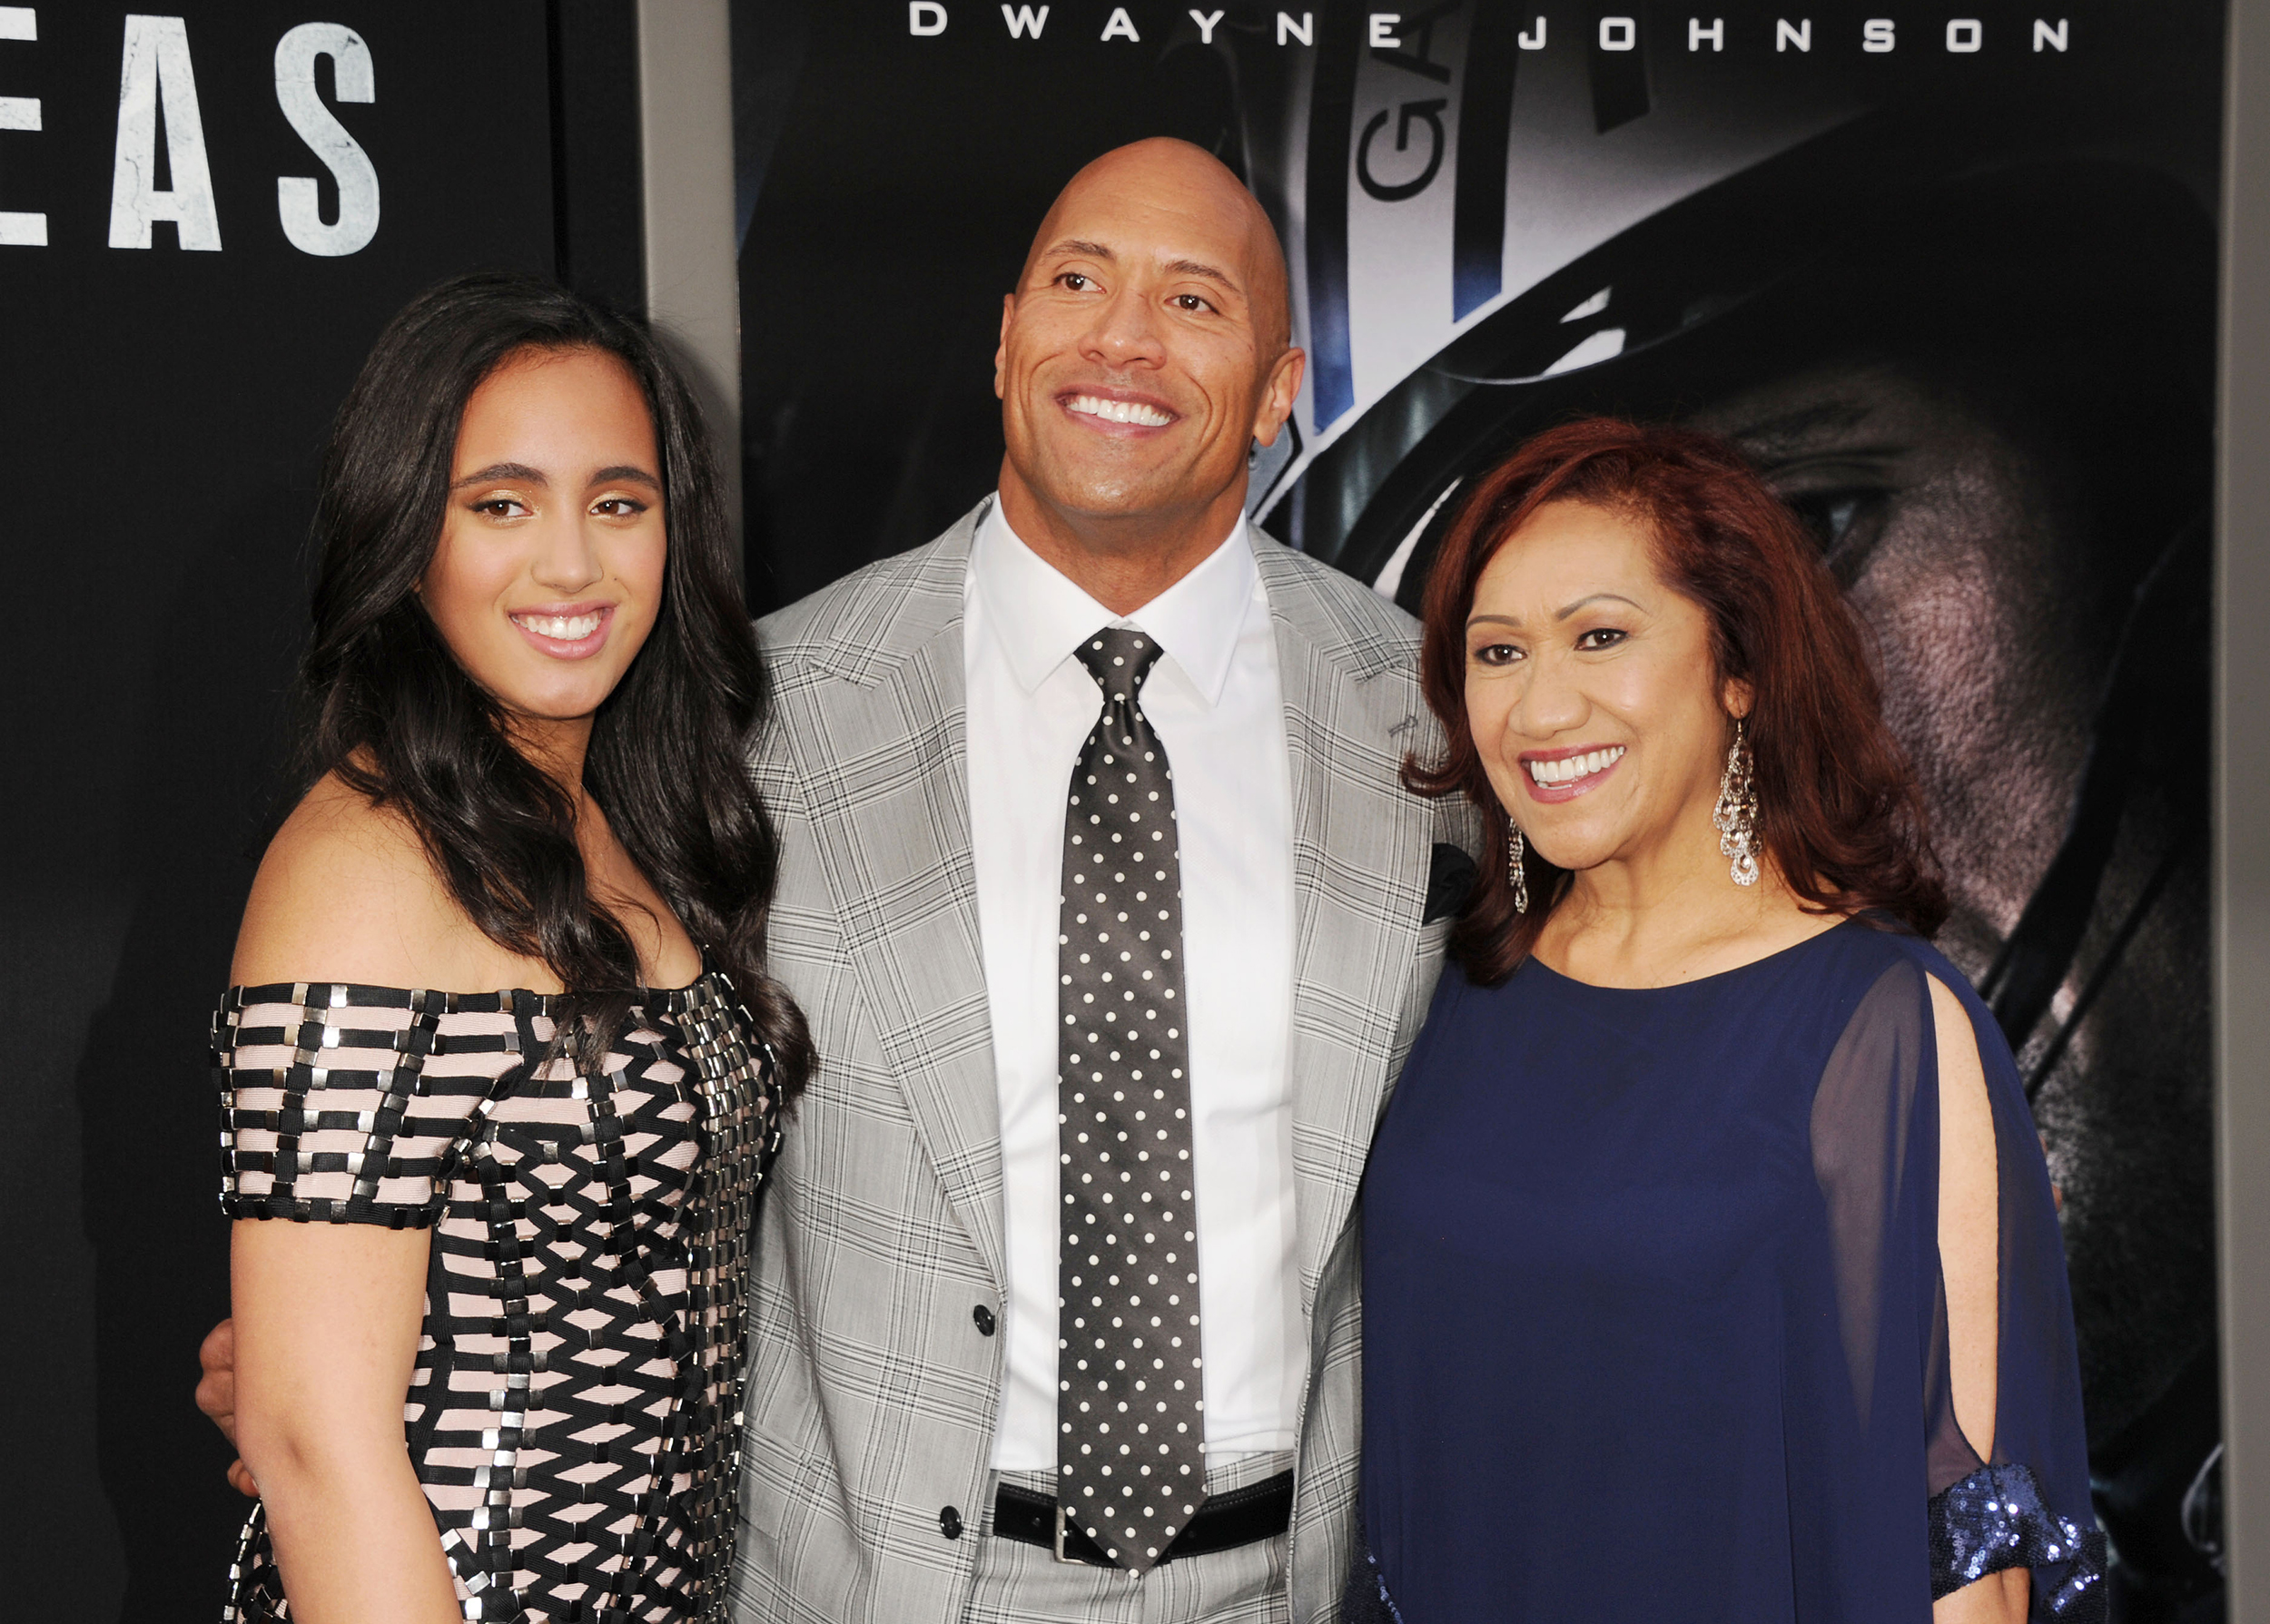 bao the rock surprised everyone when he gave his daughter a mclaren spider s when she debuted in the wrestling industry when she just turned years old 6521835b54a6a The Rock Surprised Everyone When He Gave His Daughter A Mclaren Spider 720s When She Debuted In The Wrestling Industry When She Just Turned 19 Years Old.